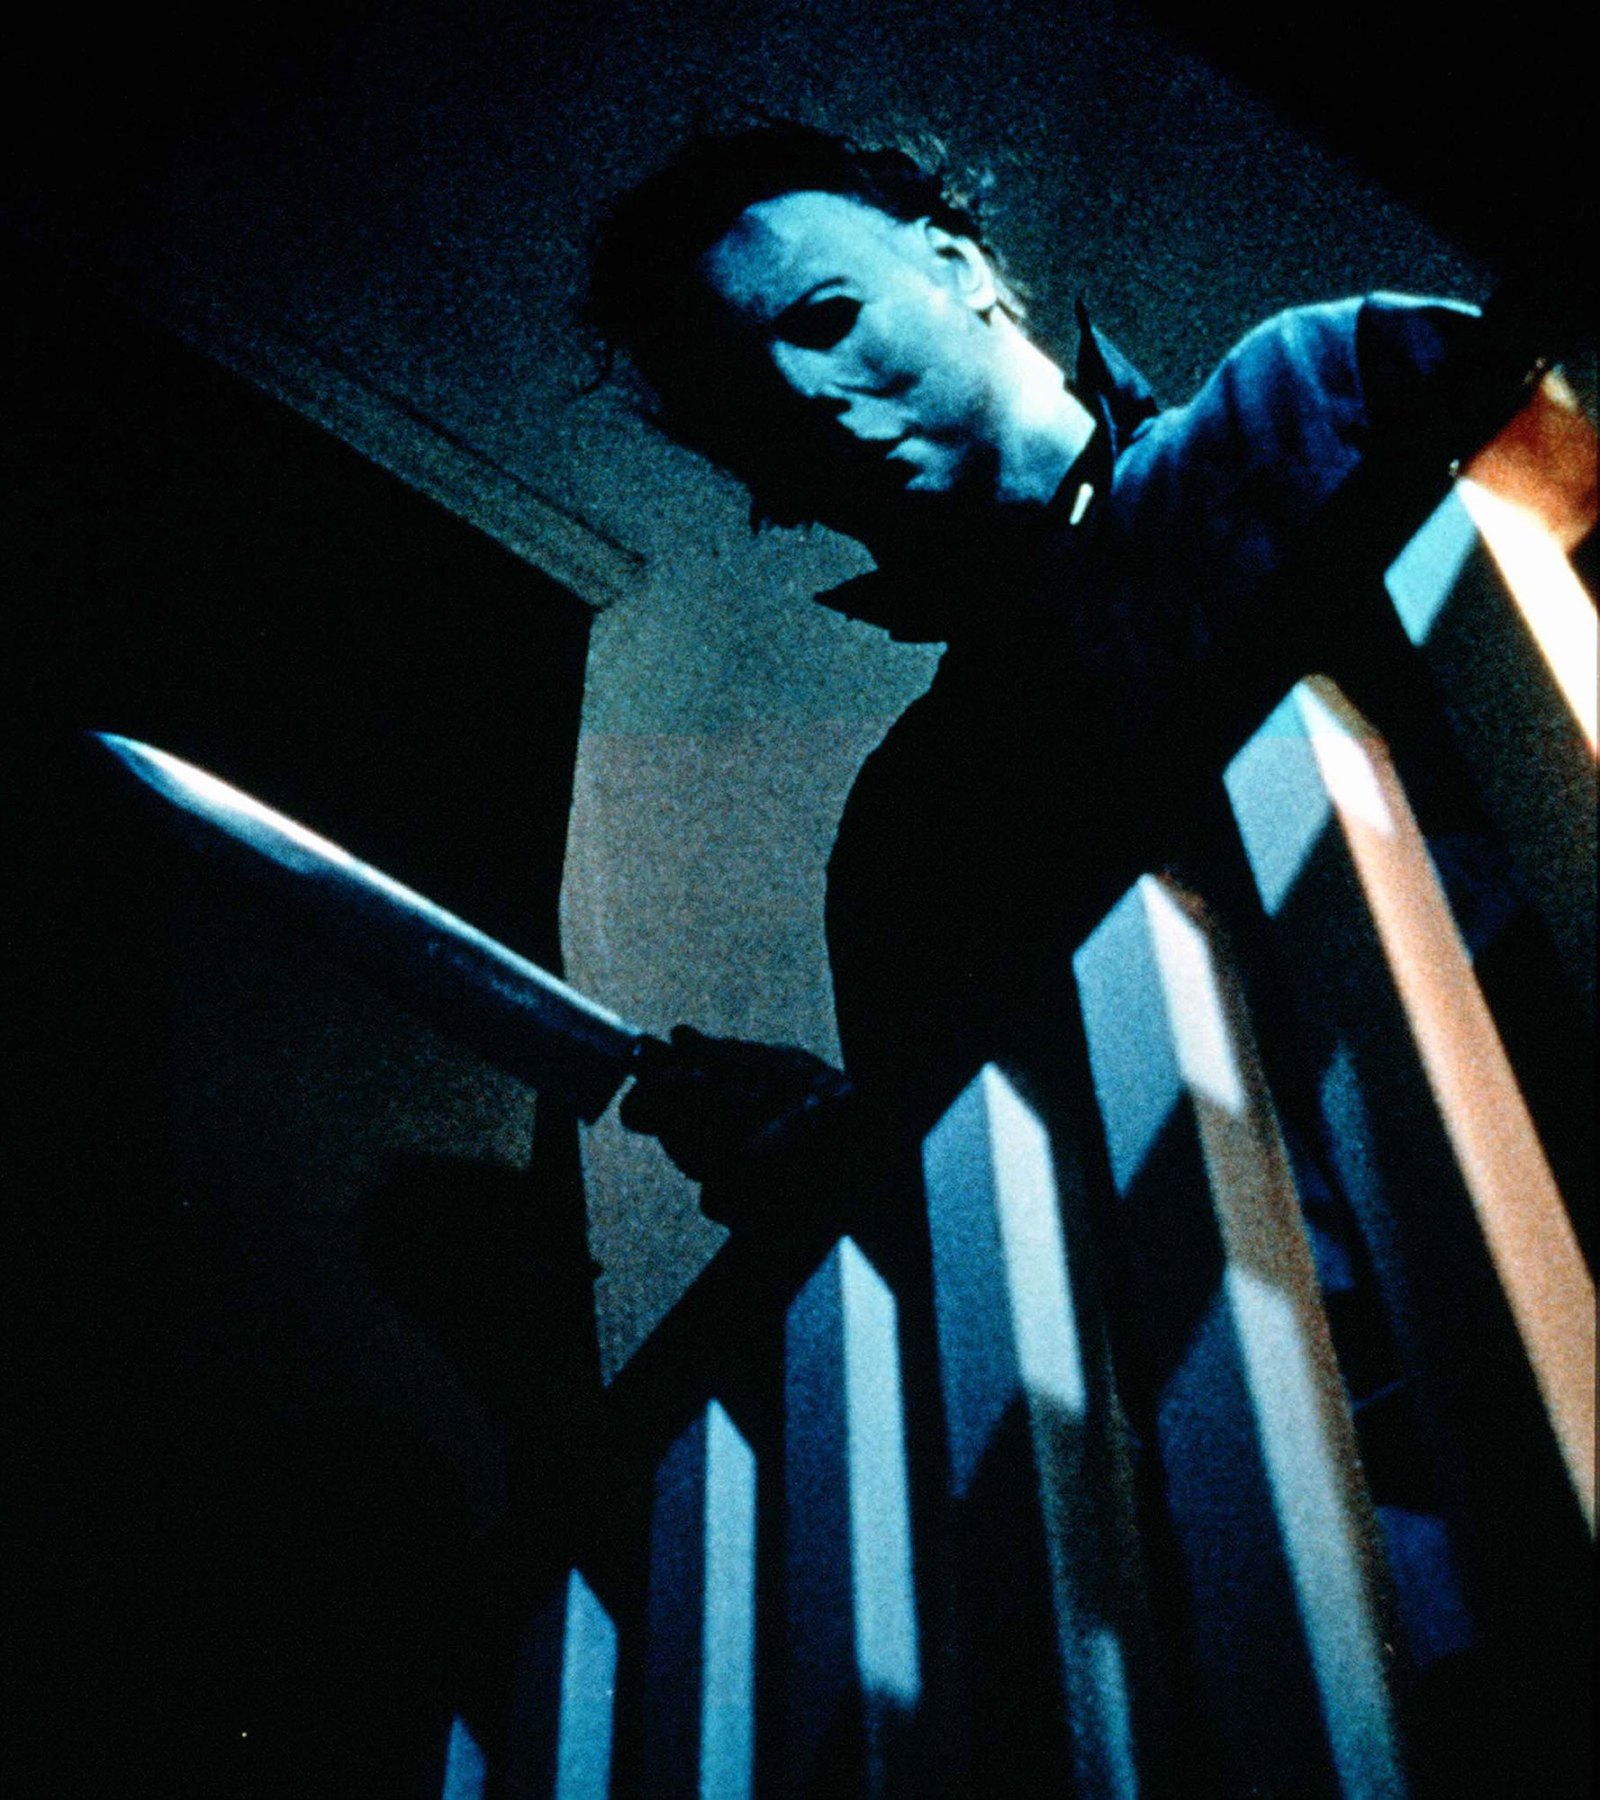 The 14 Scariest Movies of All Time